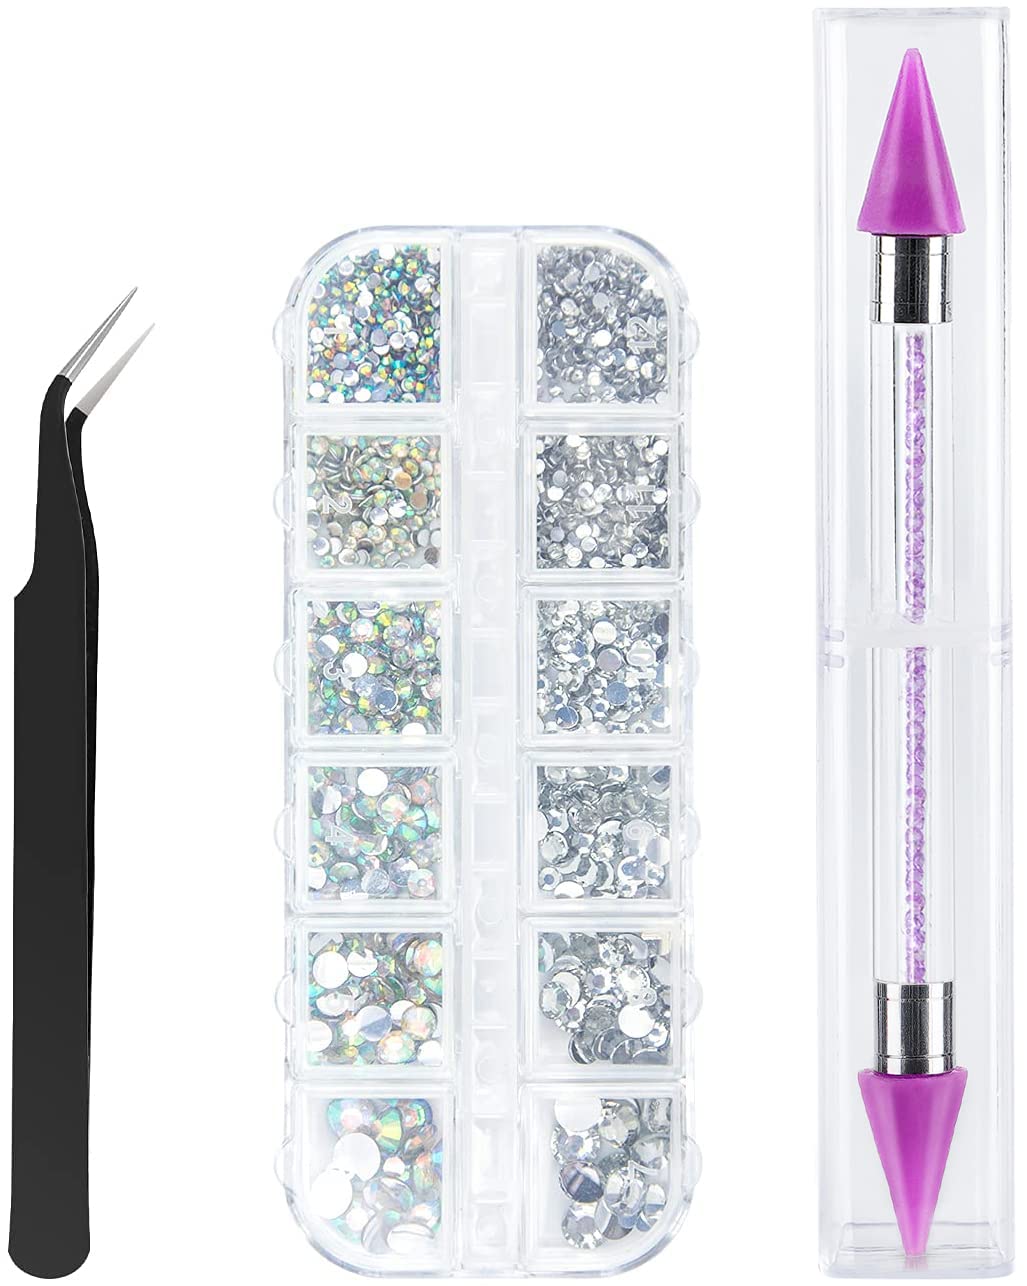 Over 3000 Pieces Flat Back Gems Nail Art Assorted Shapes Rhinestones 6 Sizes (1.5-6 mm) + Pick Up Tweezer, Pick Up Pencils for Crafts Face Jewels